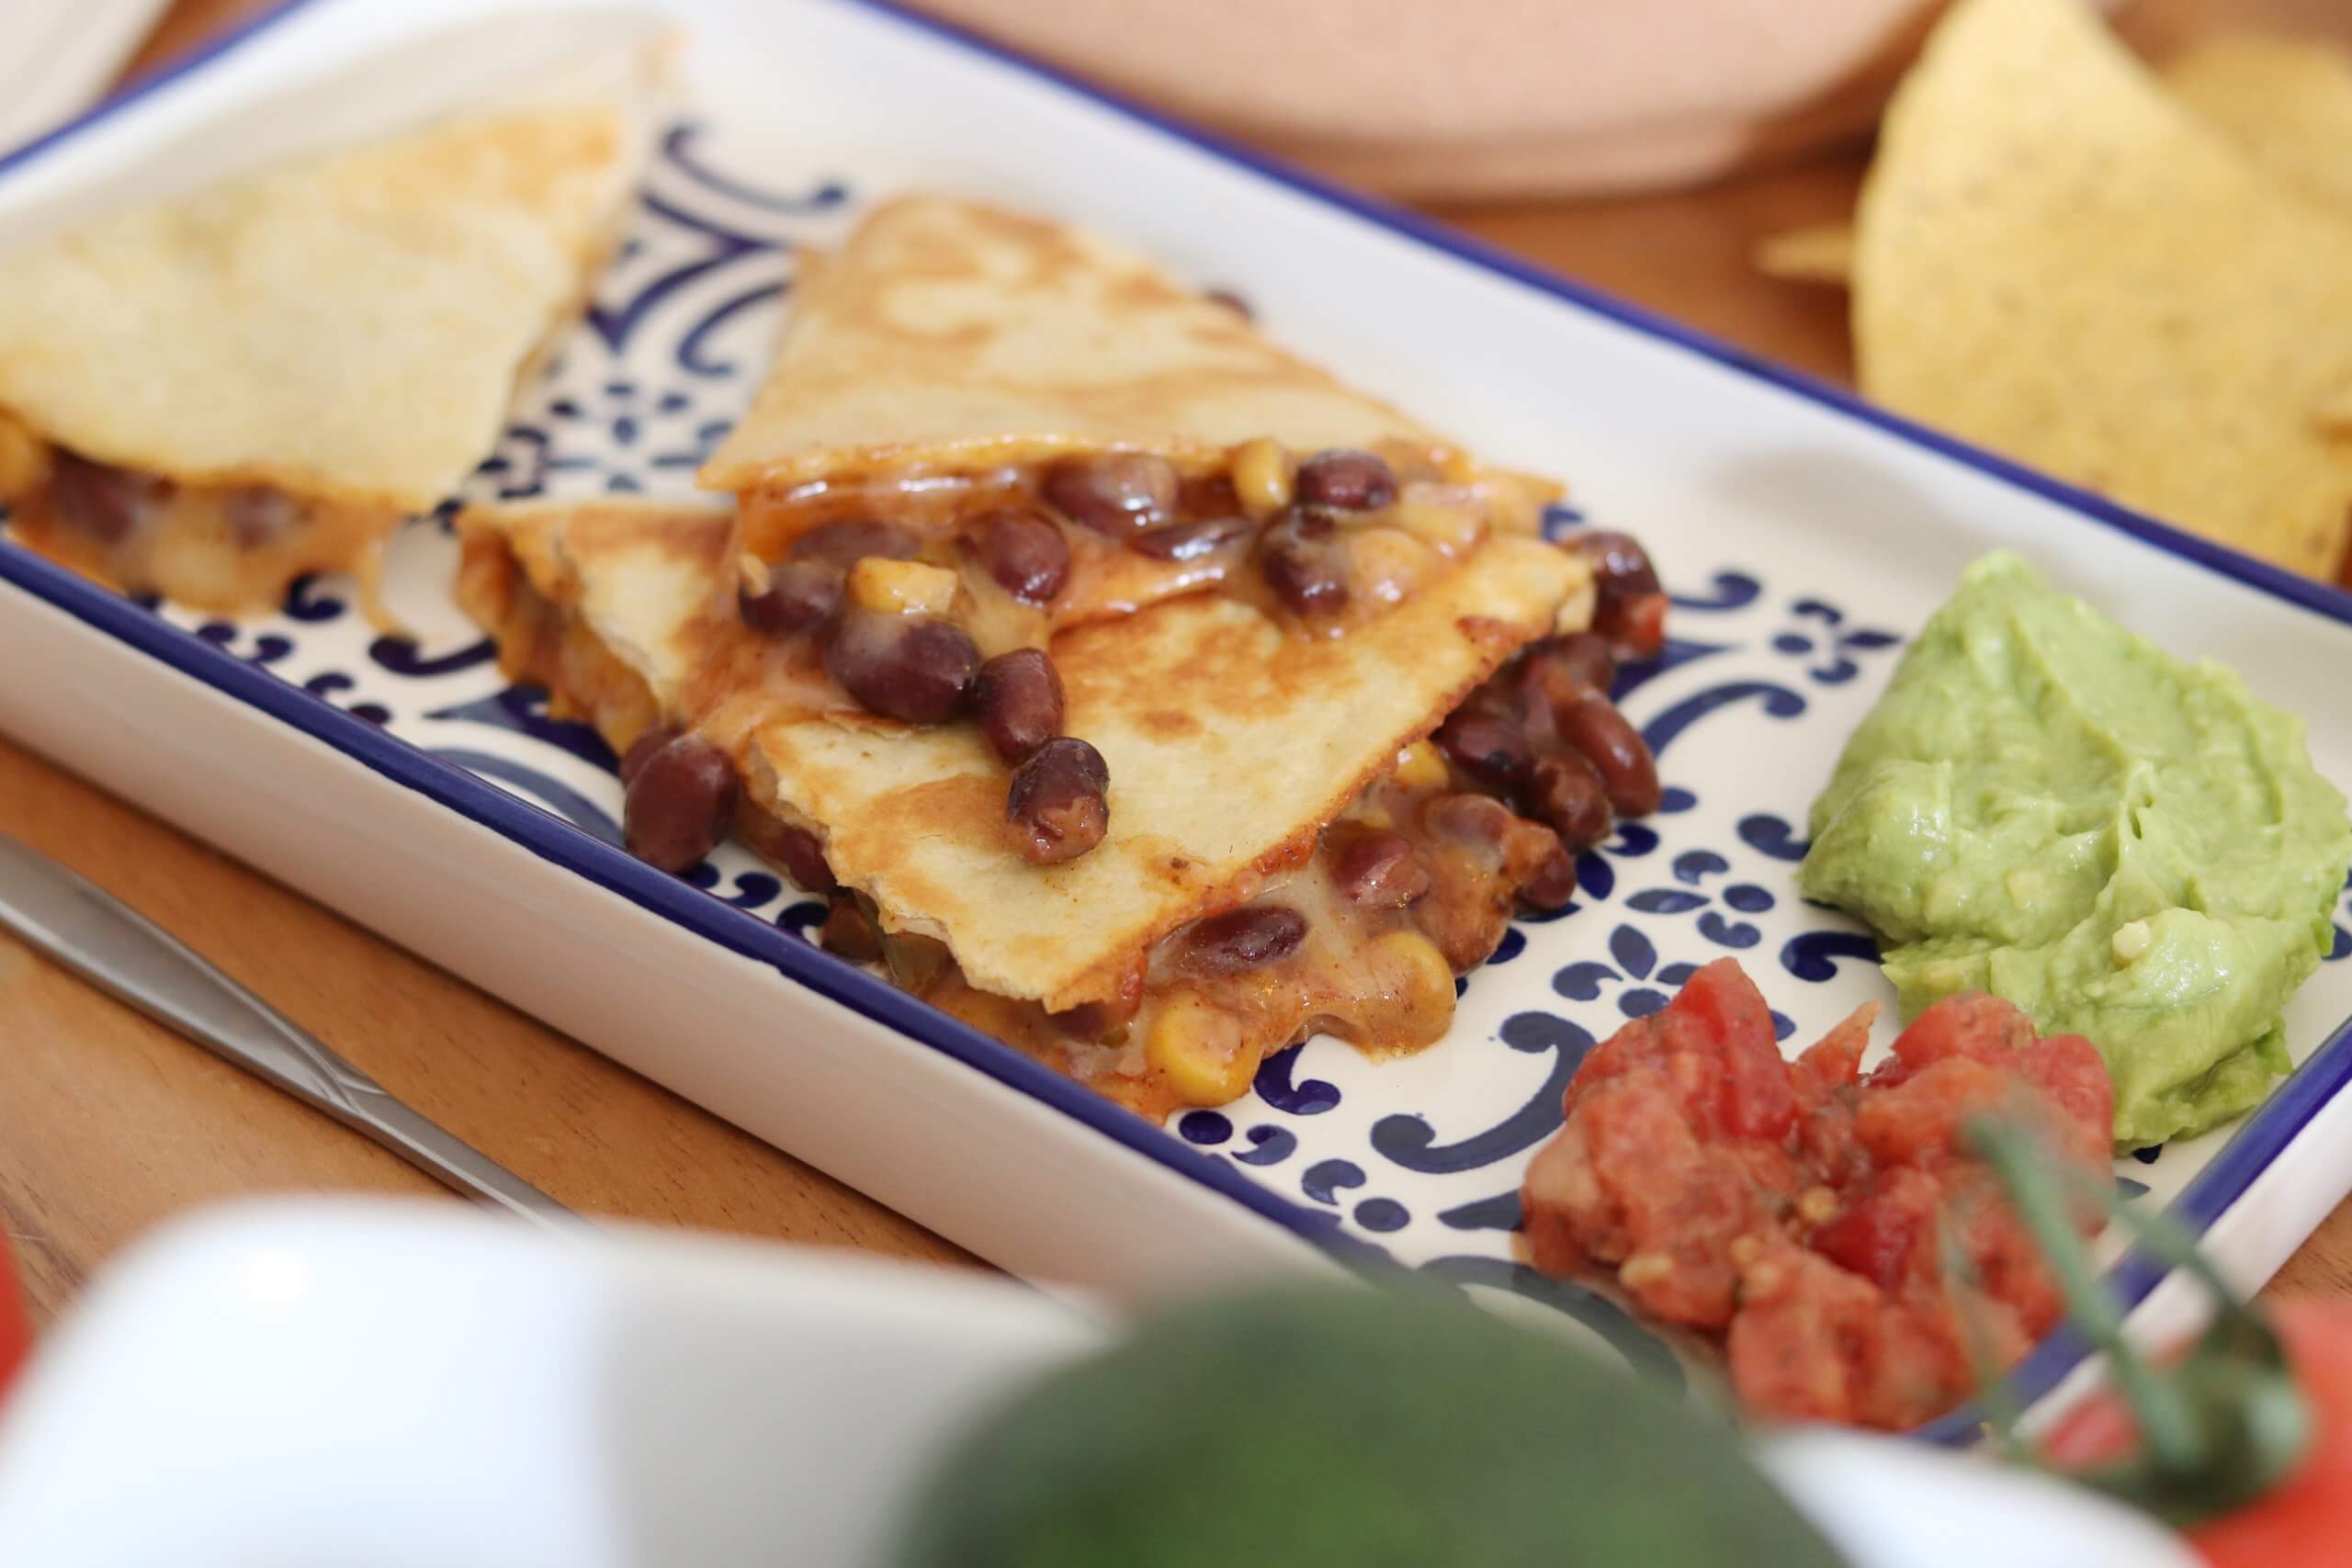 Spicing up Lunch with Black Bean Fiesta Quesadillas!